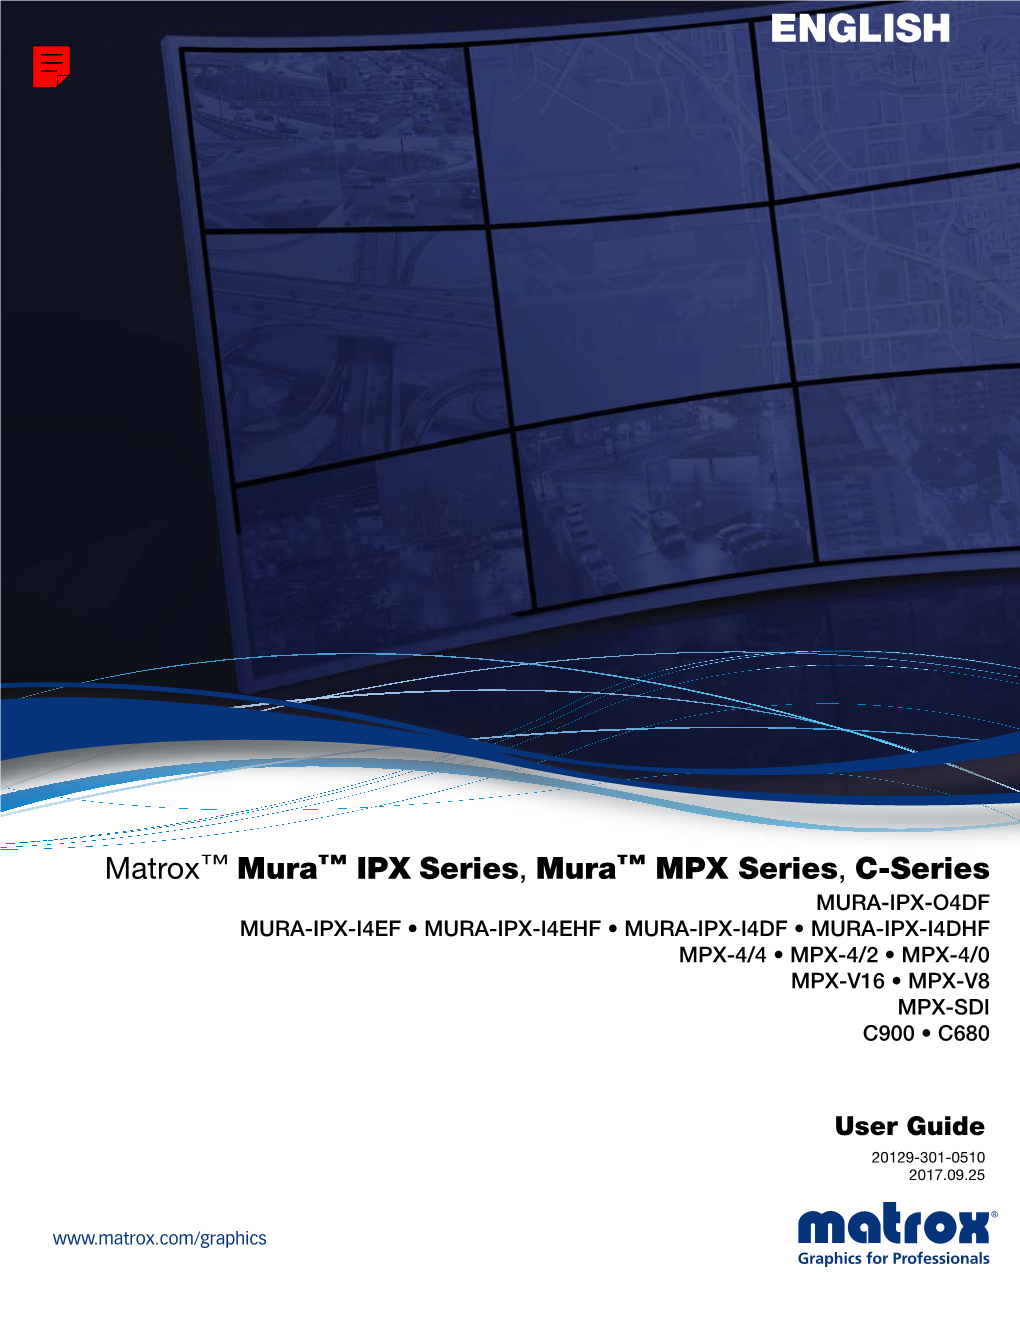 Matrox Display Wall – User Guide Using a Multi-Display Layout with an Even Number of Columns